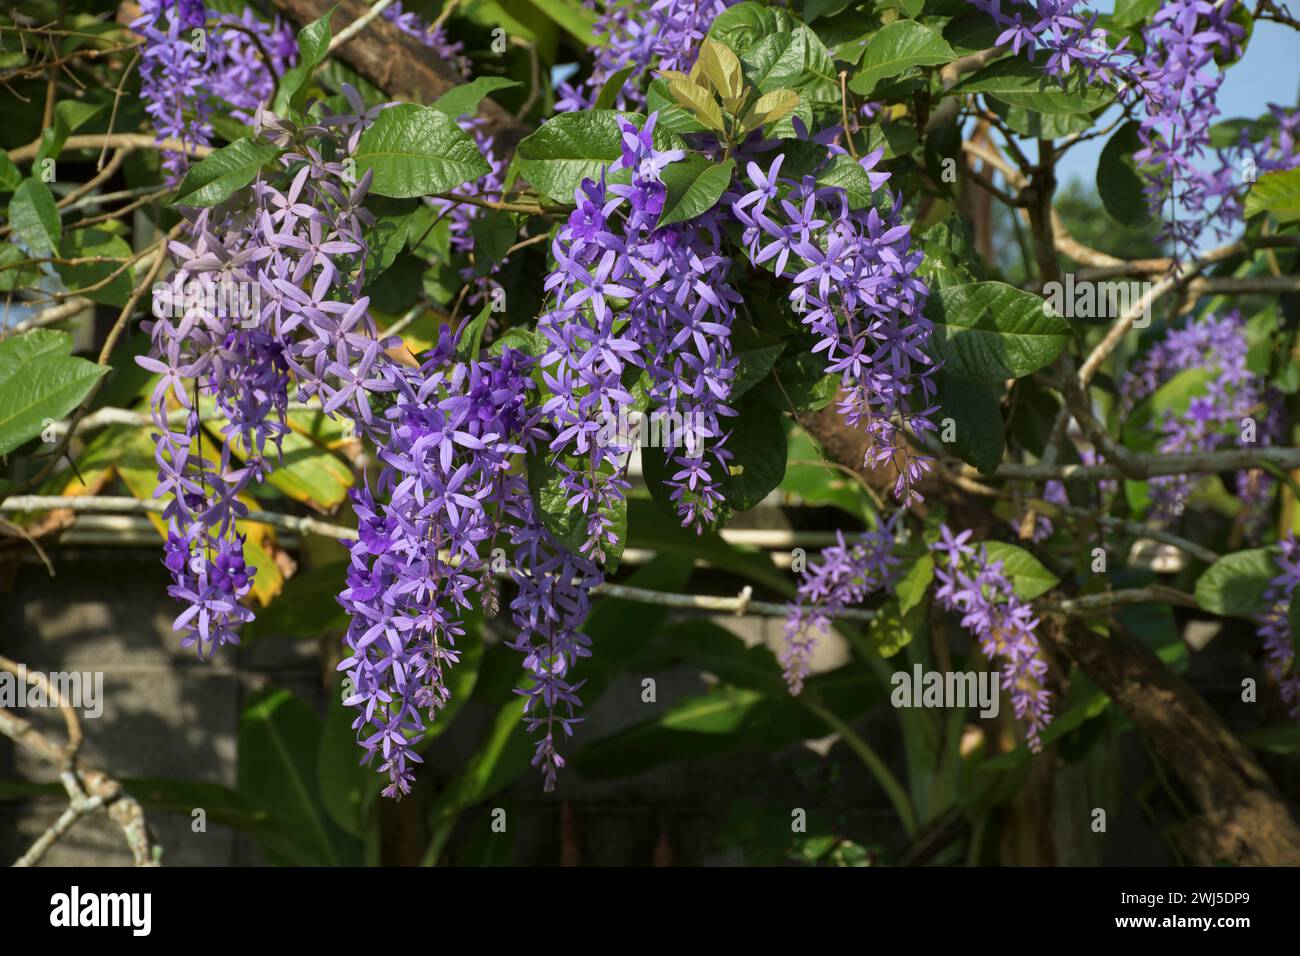 Petrea volubilis, commonly known as purple wreath, queen's wreath or sandpaper vine, is an evergreen flowering vine in the family Verbenaceae, native Stock Photo